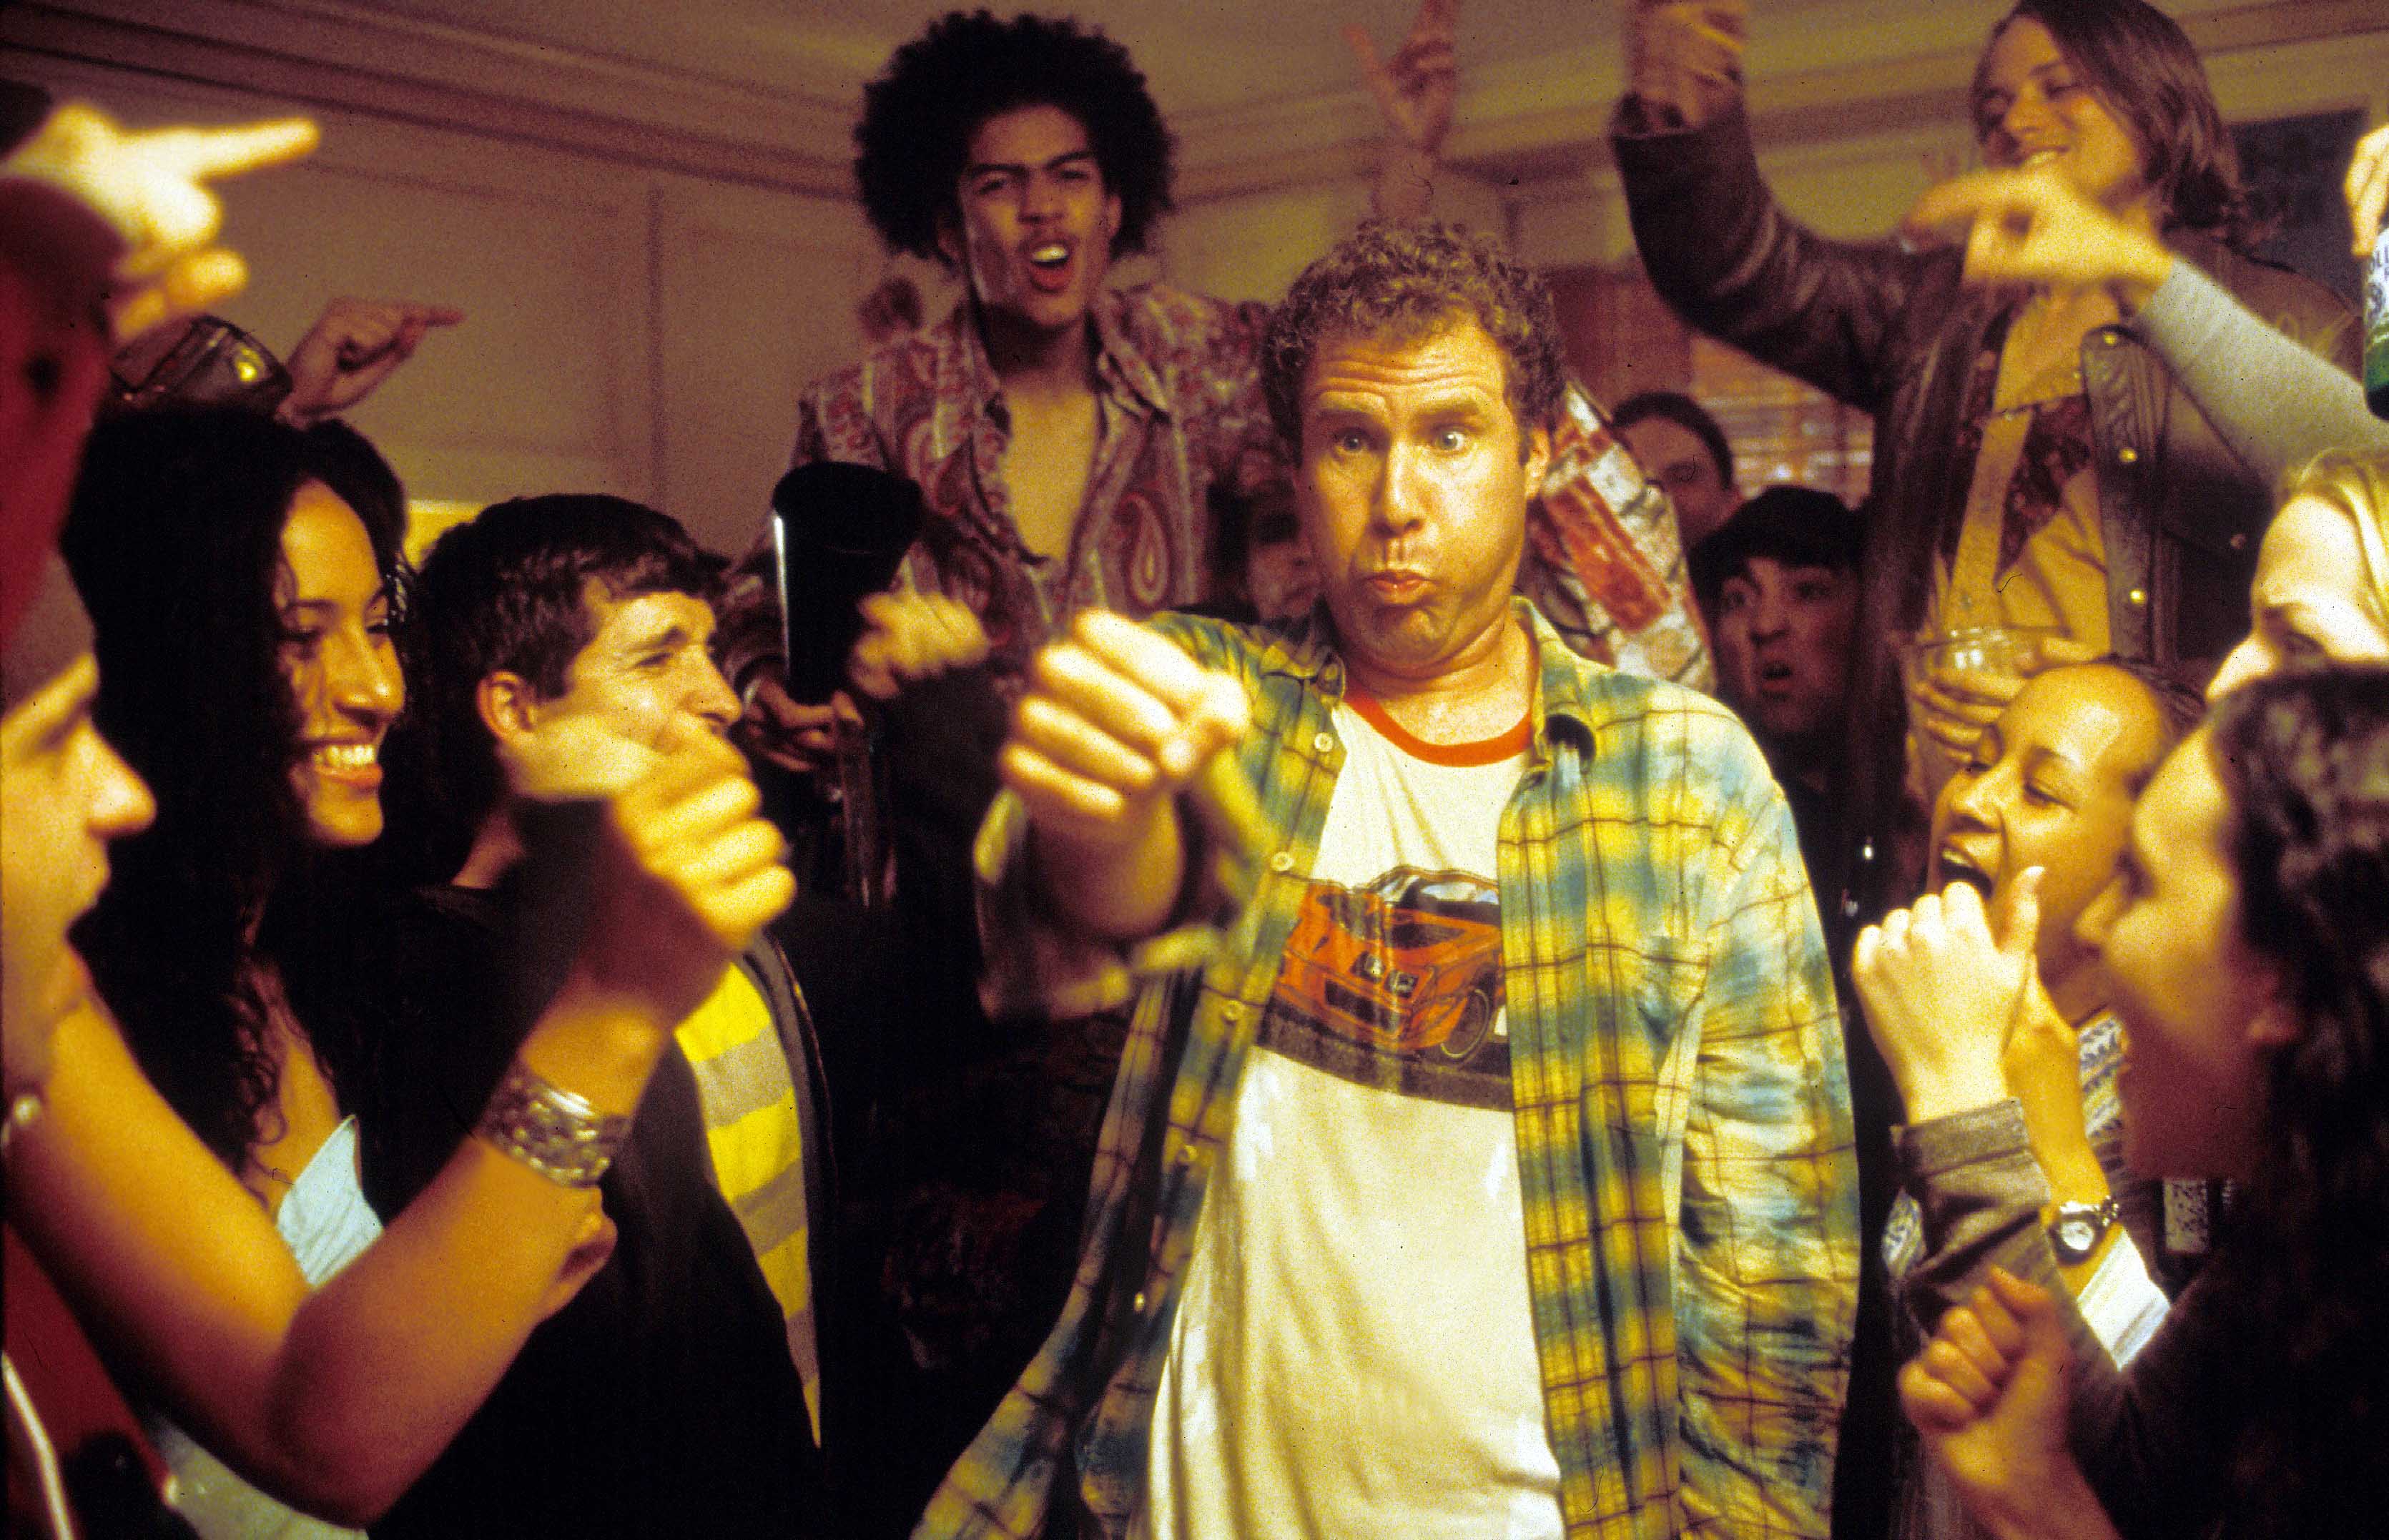 <p>We can relate to the 30-somethings in "Old School" now more than ever. The quintessential Frat Pack movie tells the story of three guys fed up with adulthood who decide to relive their college days and create a fraternity. "Old School" -- in which Will Ferrell steals the show as Frank the Tank -- gained an immense cult following after its 2003 release and is now considered a classic, must-watch comedy film.</p>